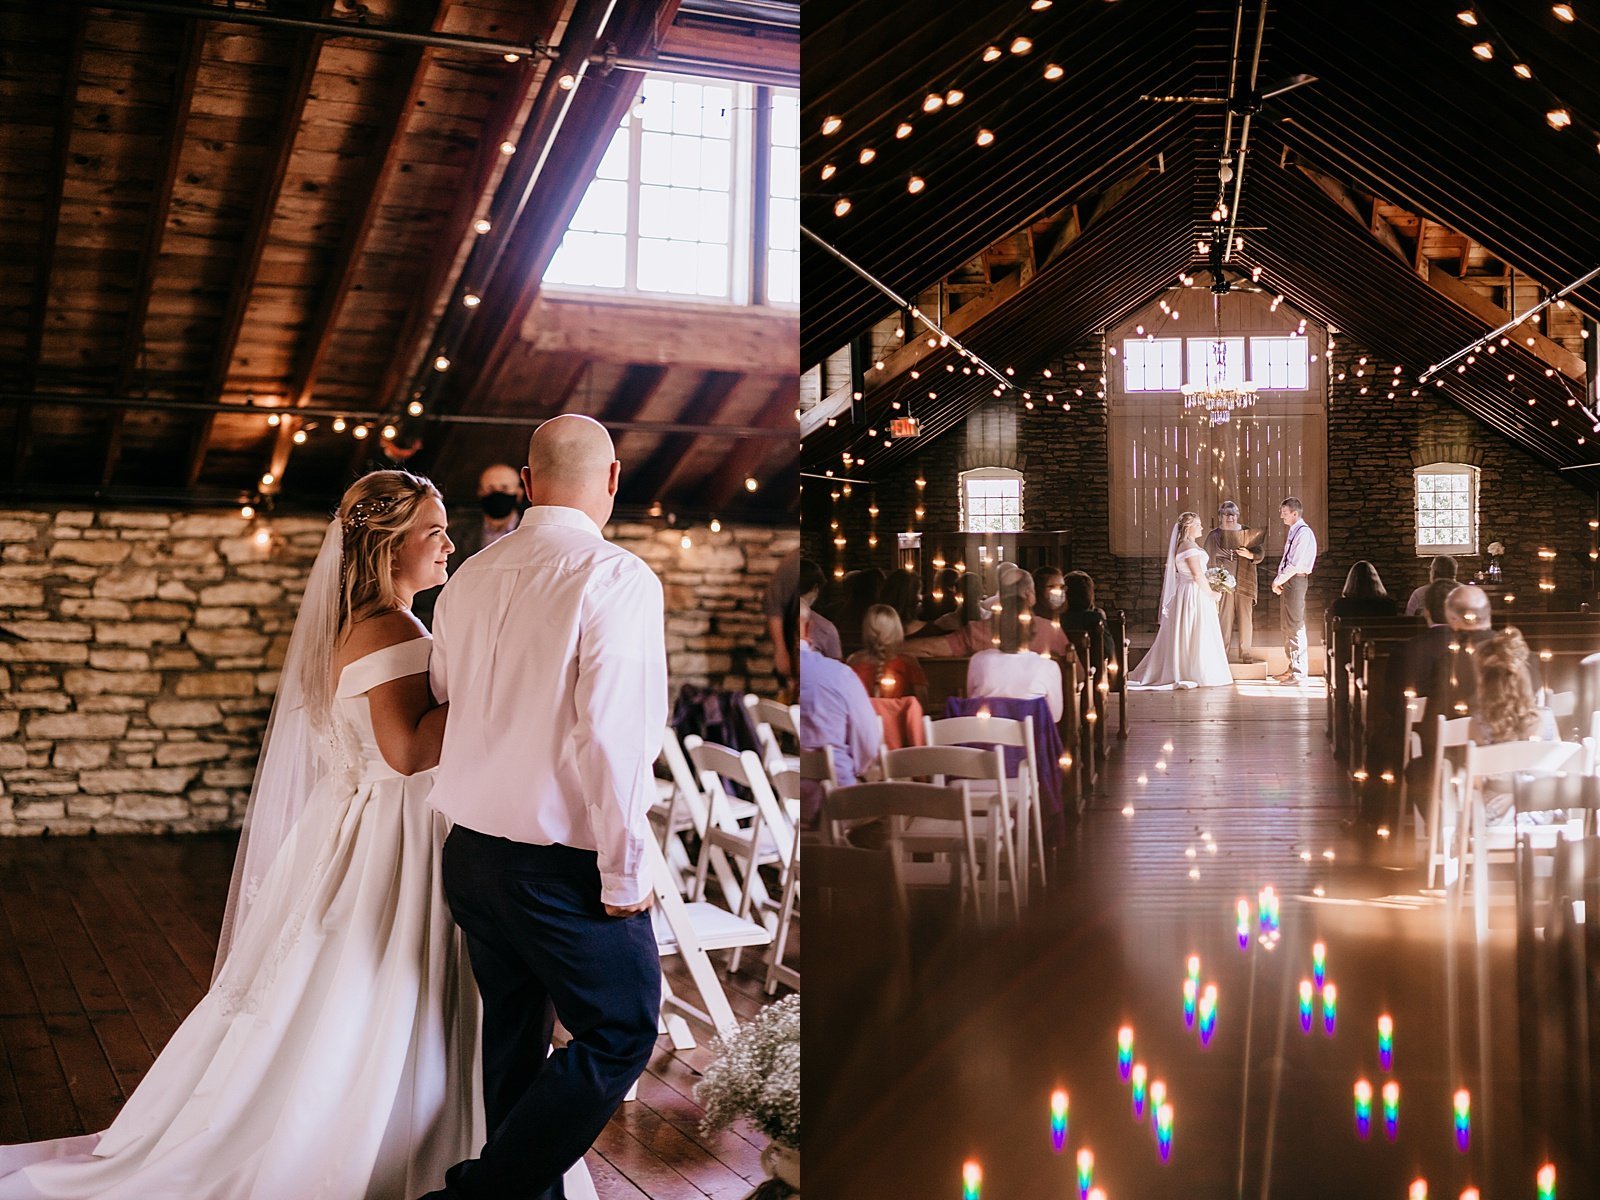  Bride approaching the alter under twinkle lights in a barn venue 